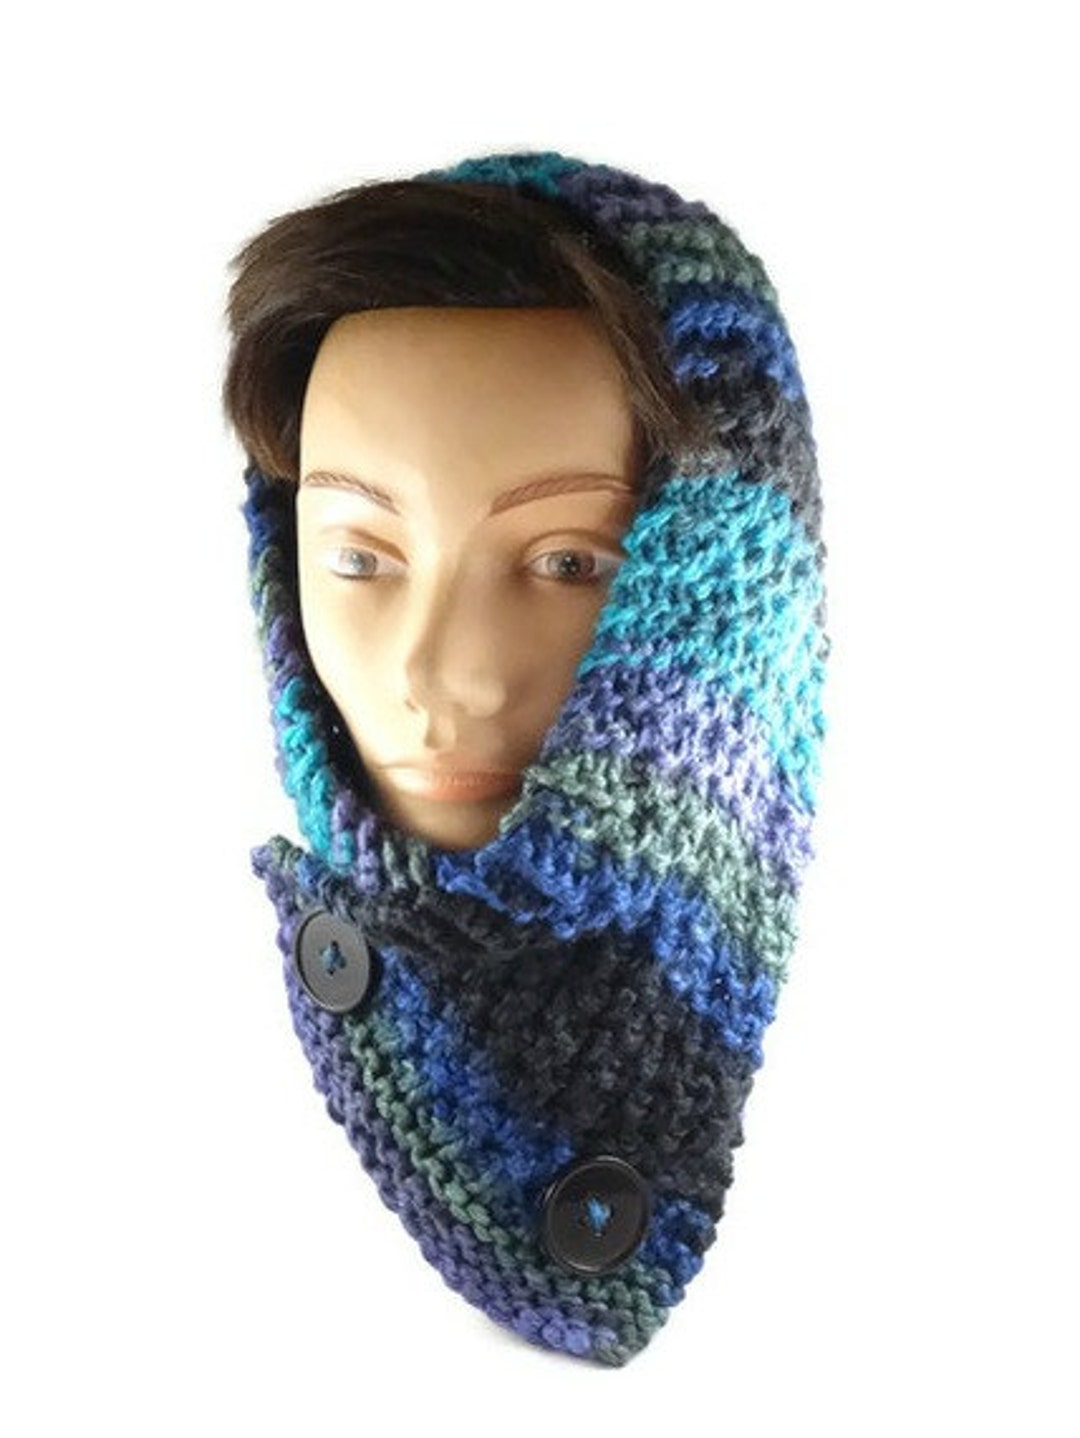 Hand Knit Peacock Scarf Chunky Knitted Cowl Fashion Scarf - Etsy